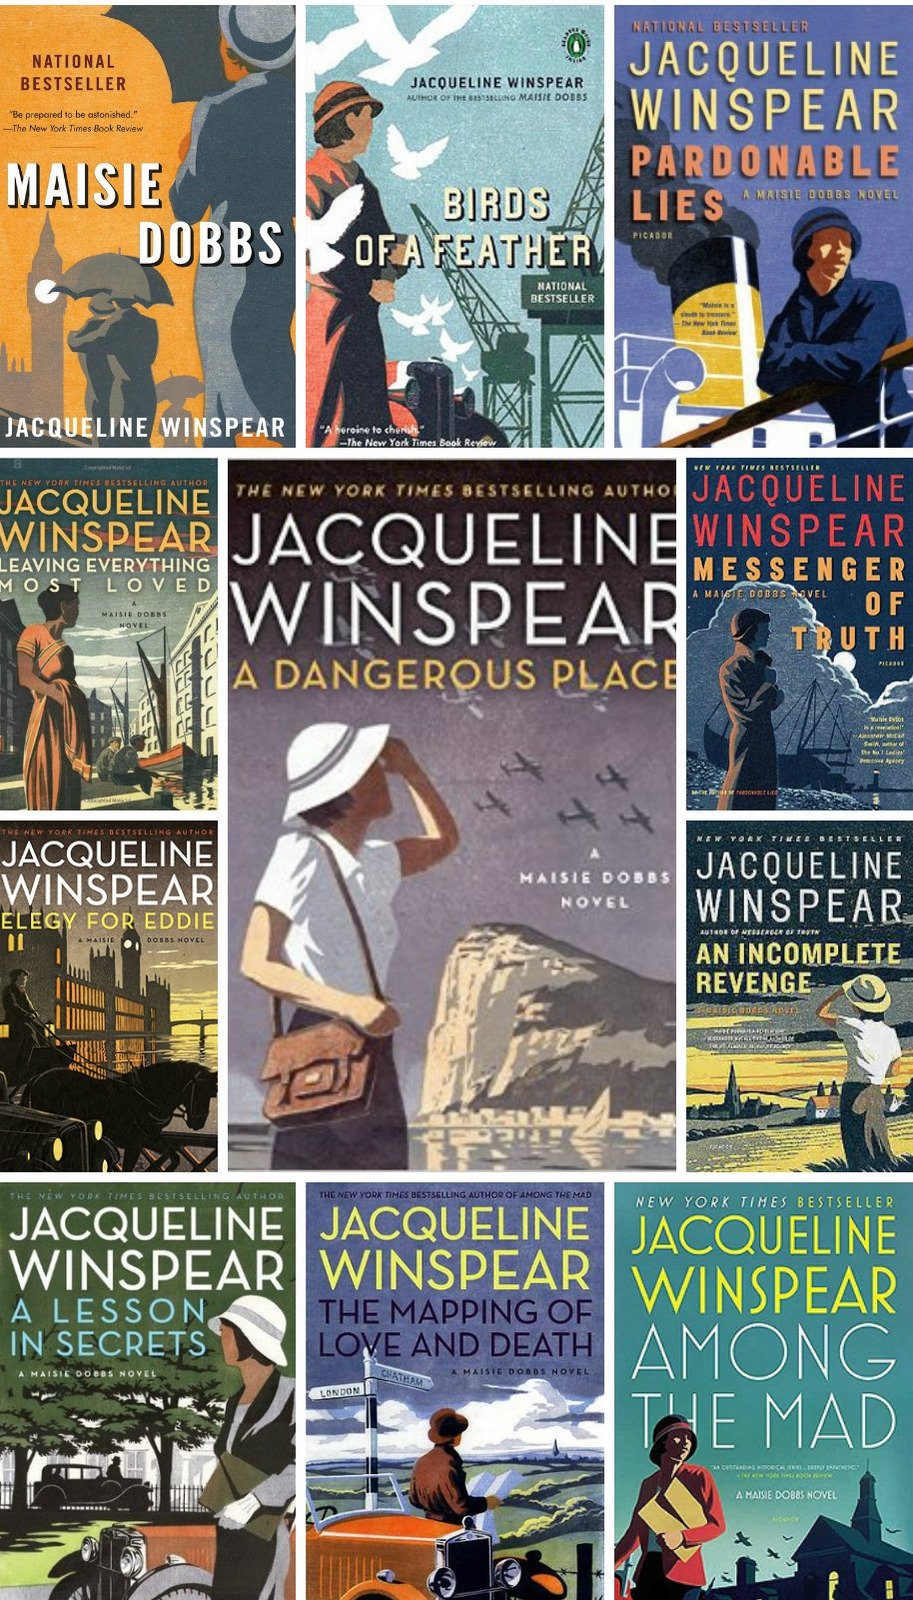 The Maisie Dobbs Series by Jacqueline Winspear ~ 14 MP3 AUDIOBOOK COLLECTION